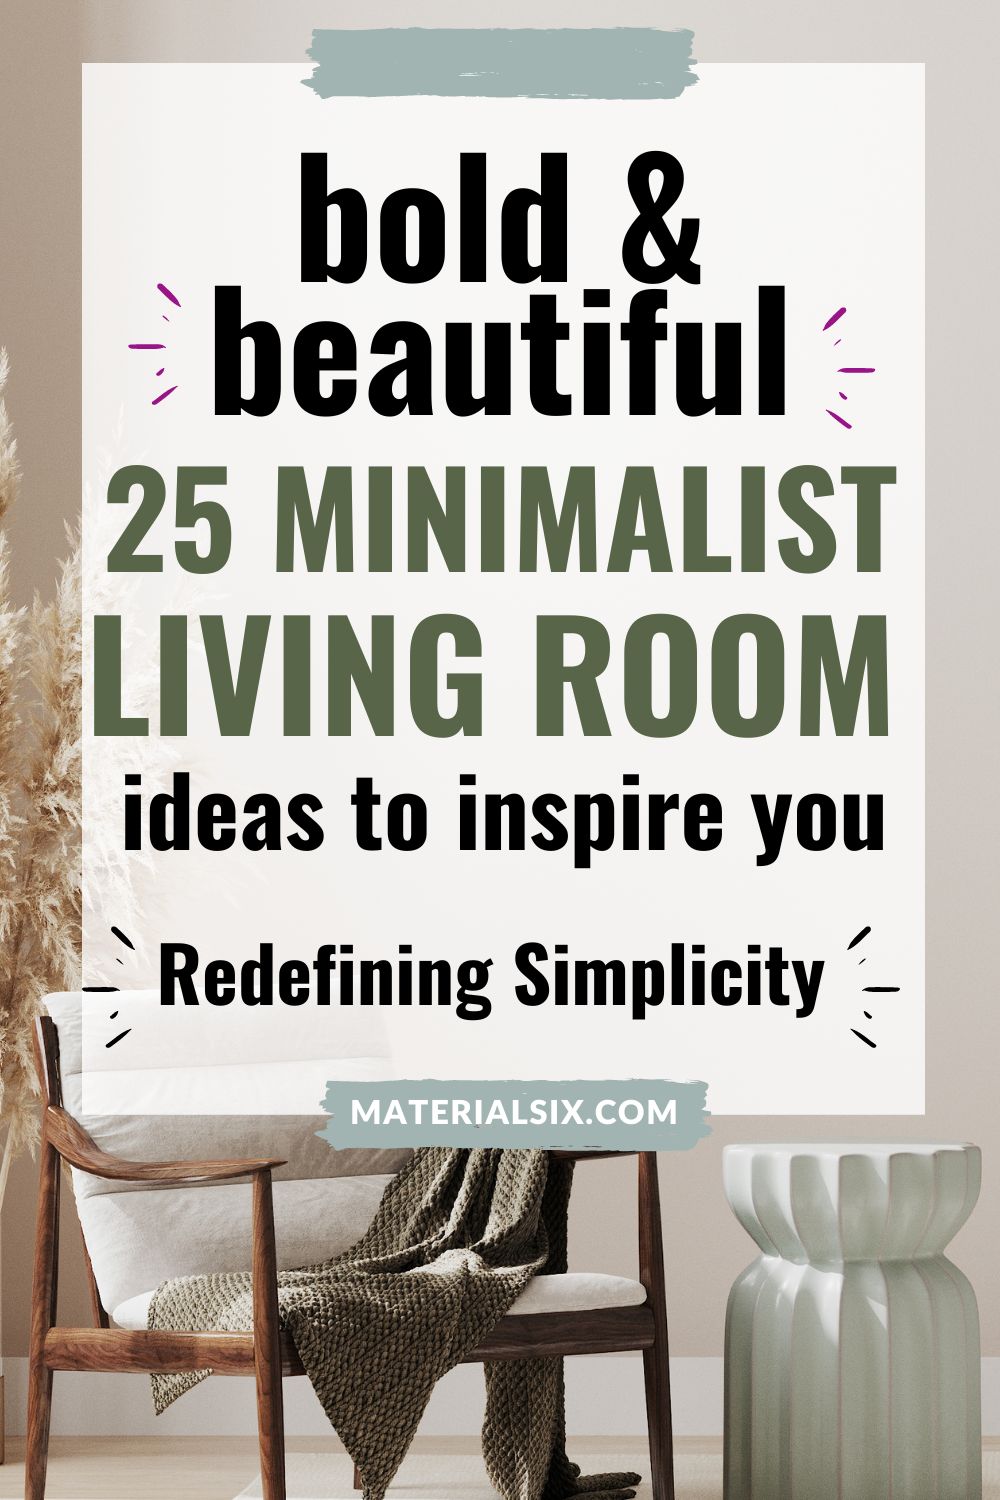 Bold and Beautiful 25 Minimalist Living Room Ideas to Inspire You